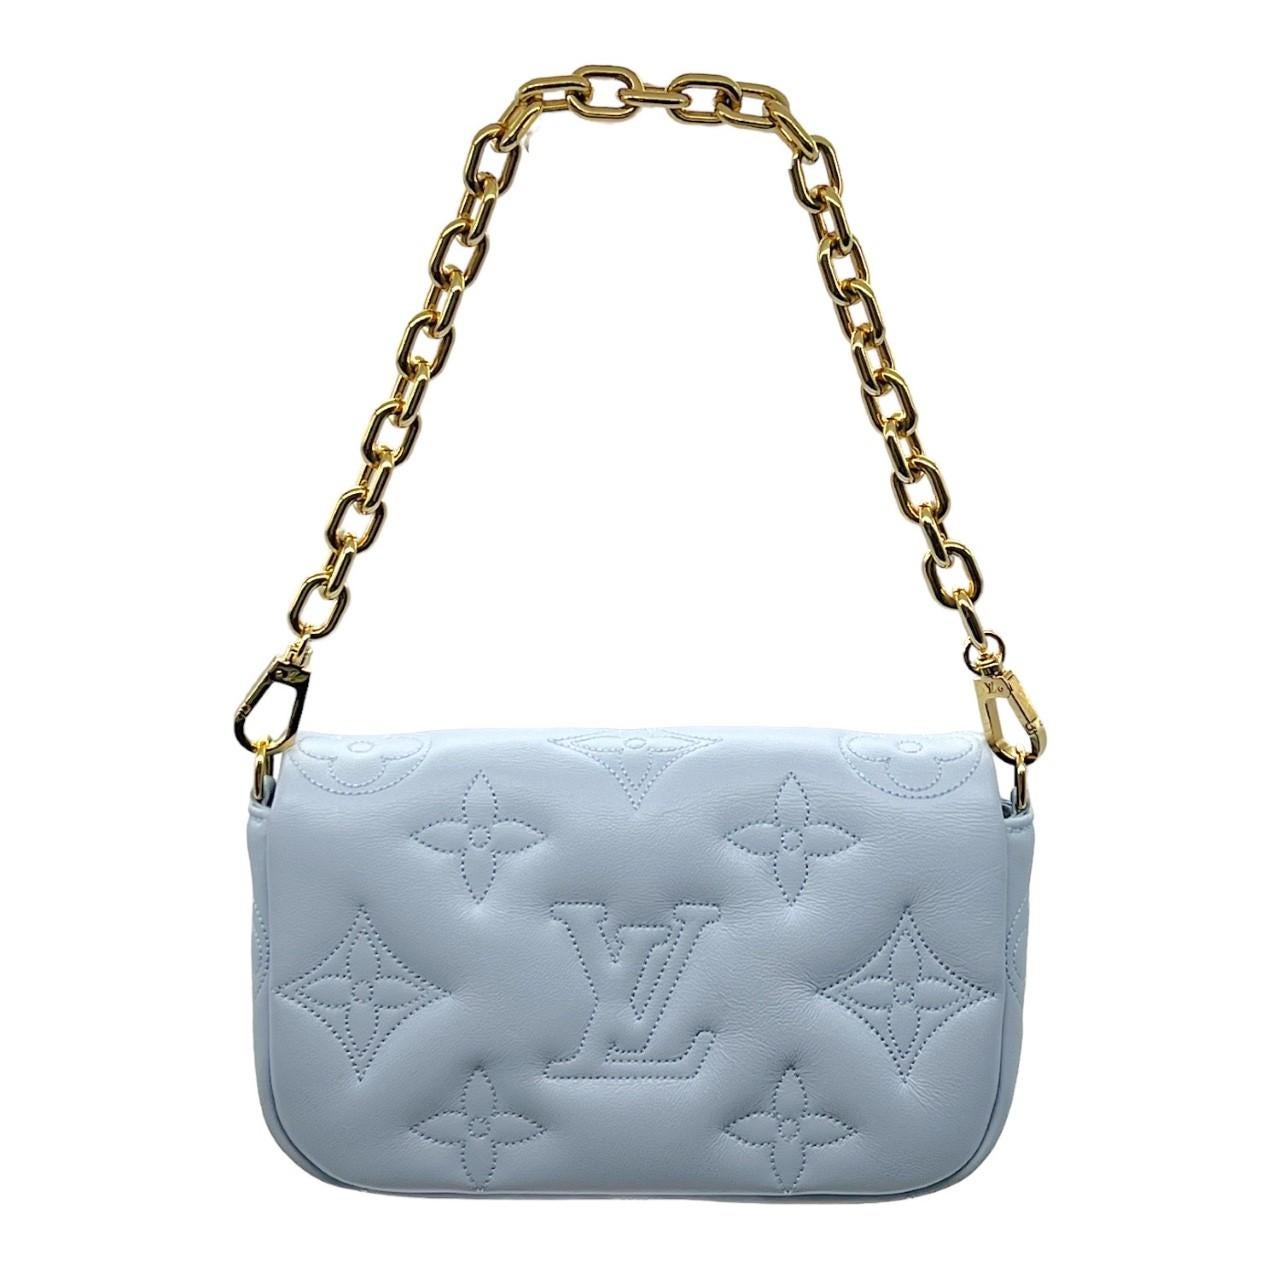 We are offering this trendy Louis Vuitton Wallet on Strap Bubblegram in the Blue Glacier color. Made in Italy, this bag is finely crafted of a padded calfskin leather exterior with an embroidered Louis Vuitton Monogram pattern. It has a removeable